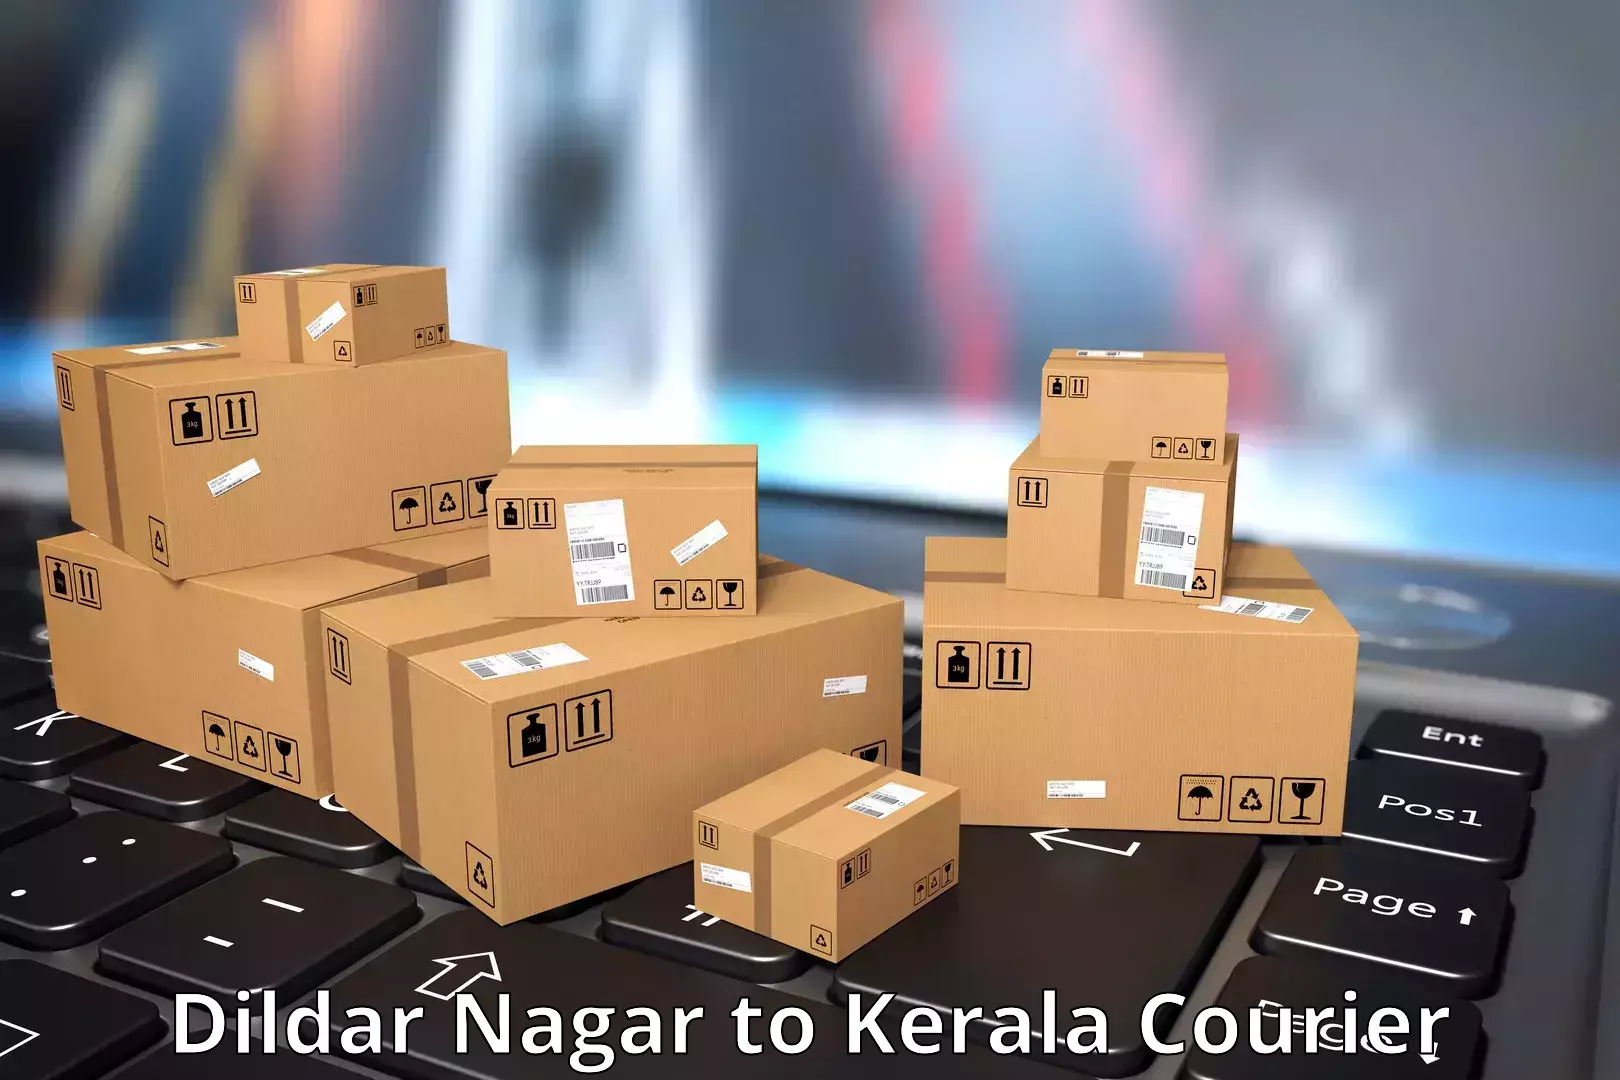 Enhanced tracking features Dildar Nagar to Cochin University of Science and Technology